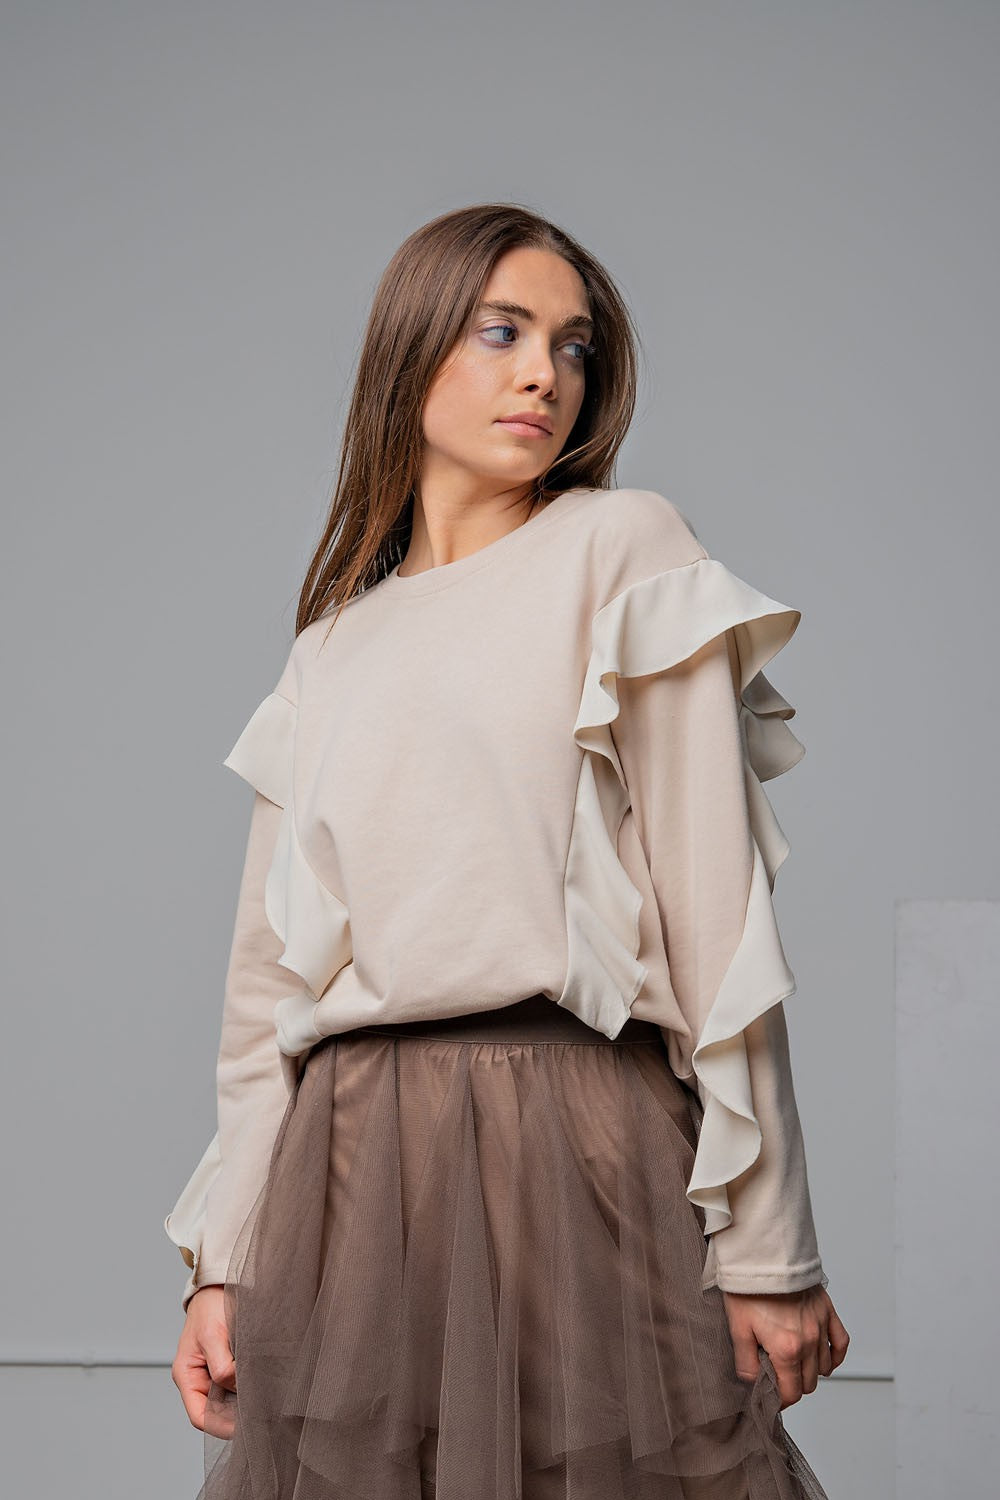 Easel Lt Khaki Dropped Shoulders Ruffle Sleeves Crew Neckline Loose Fit Top - Roulhac Fashion Boutique